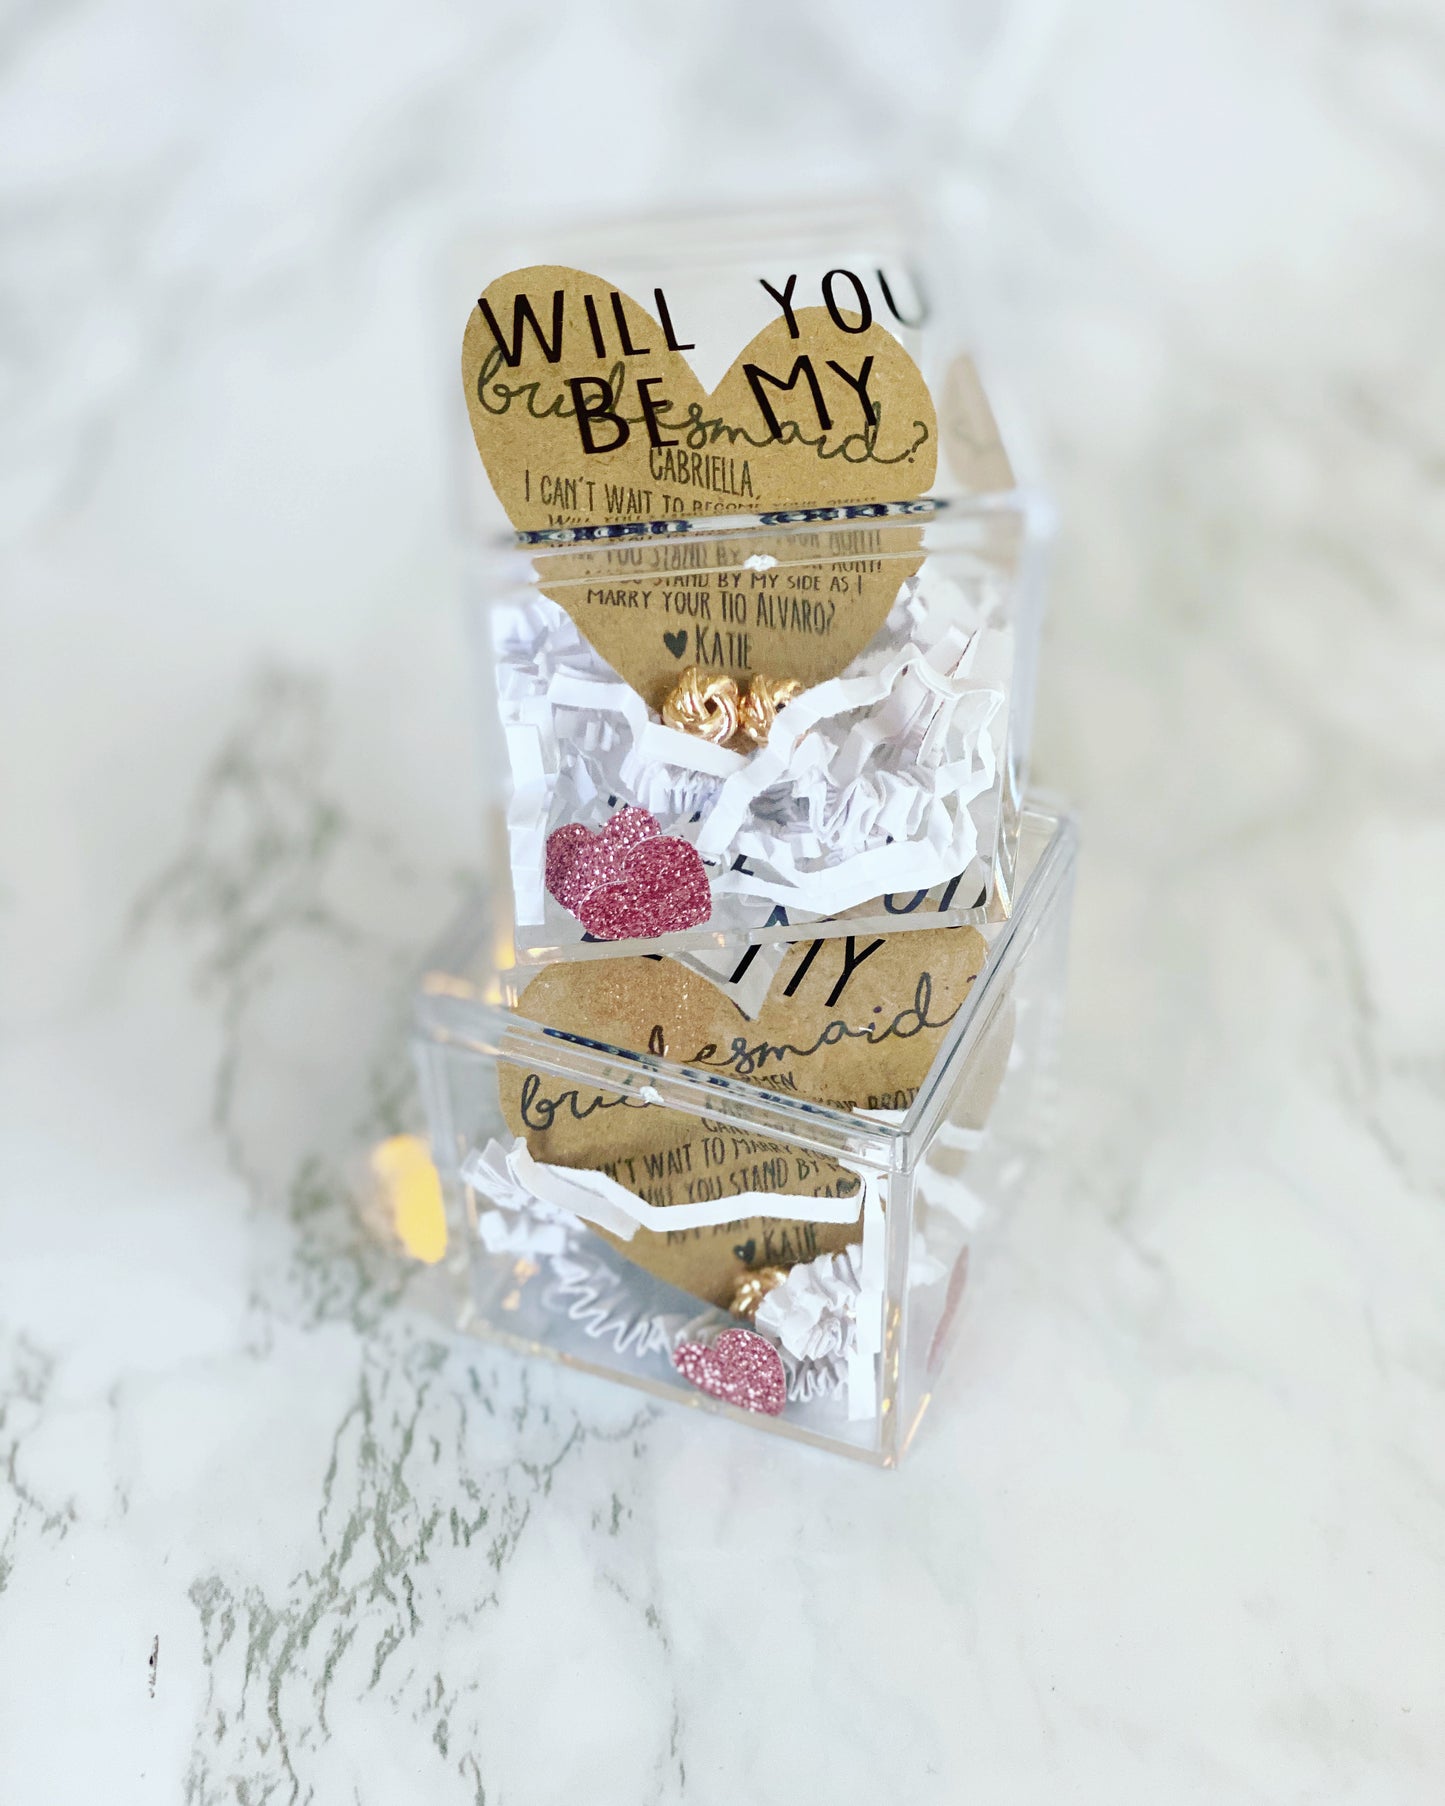 Will you be my... Knot earrings bridesmaid proposal gift!